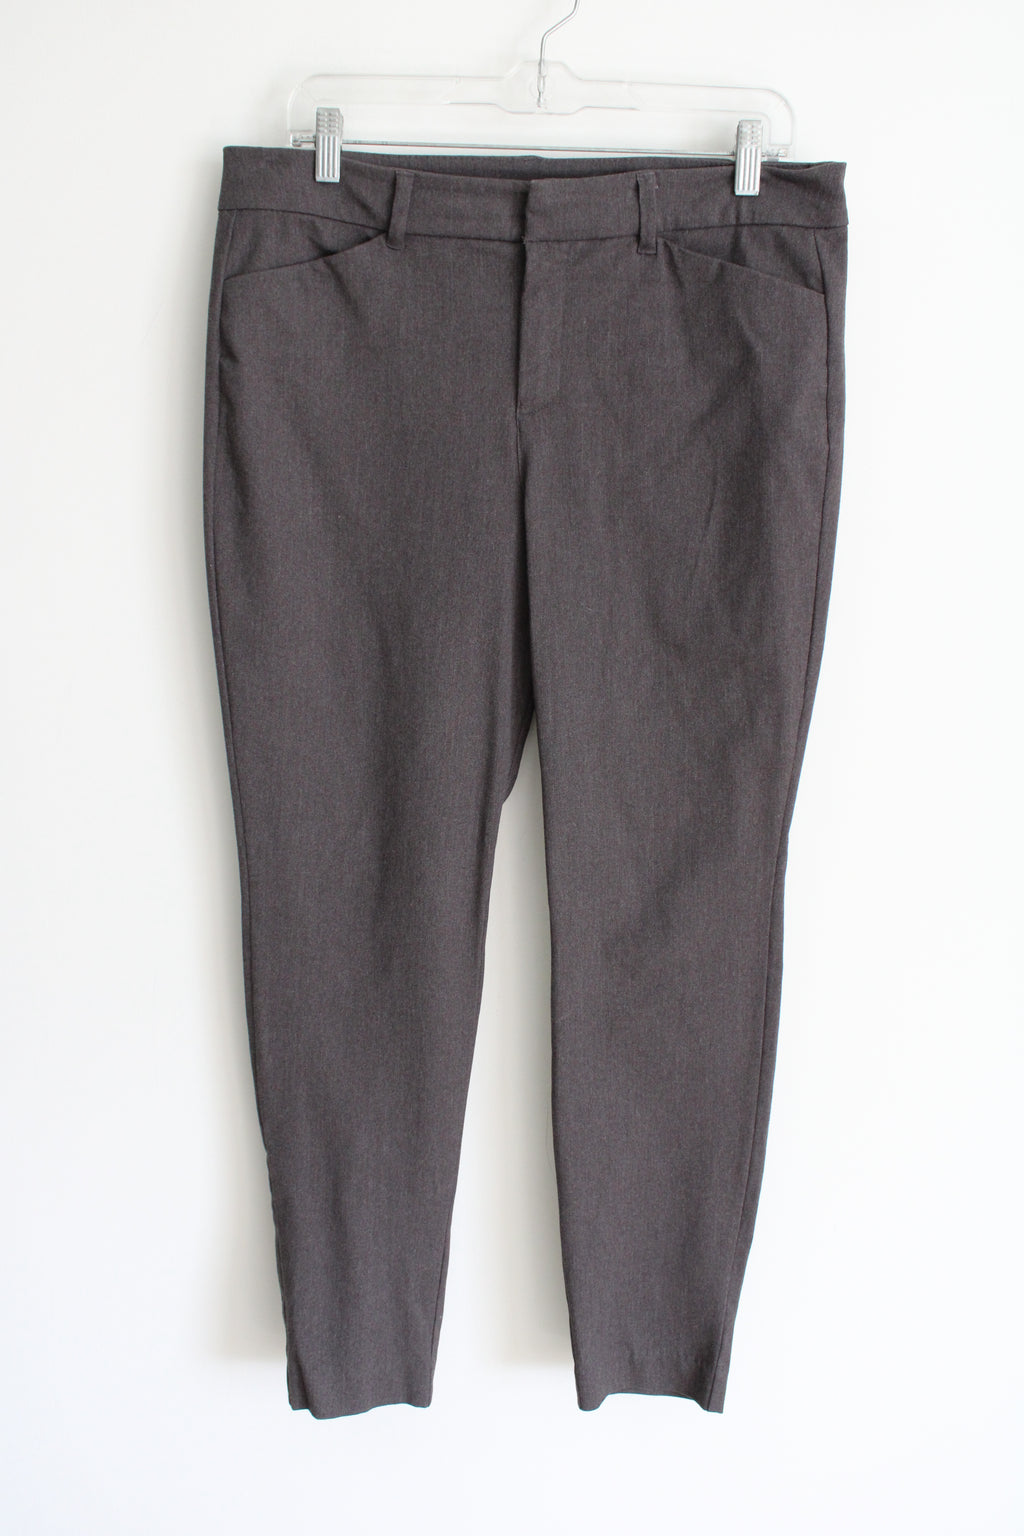 Old Navy Pixie High Rise Gray Pant | 12 Petite